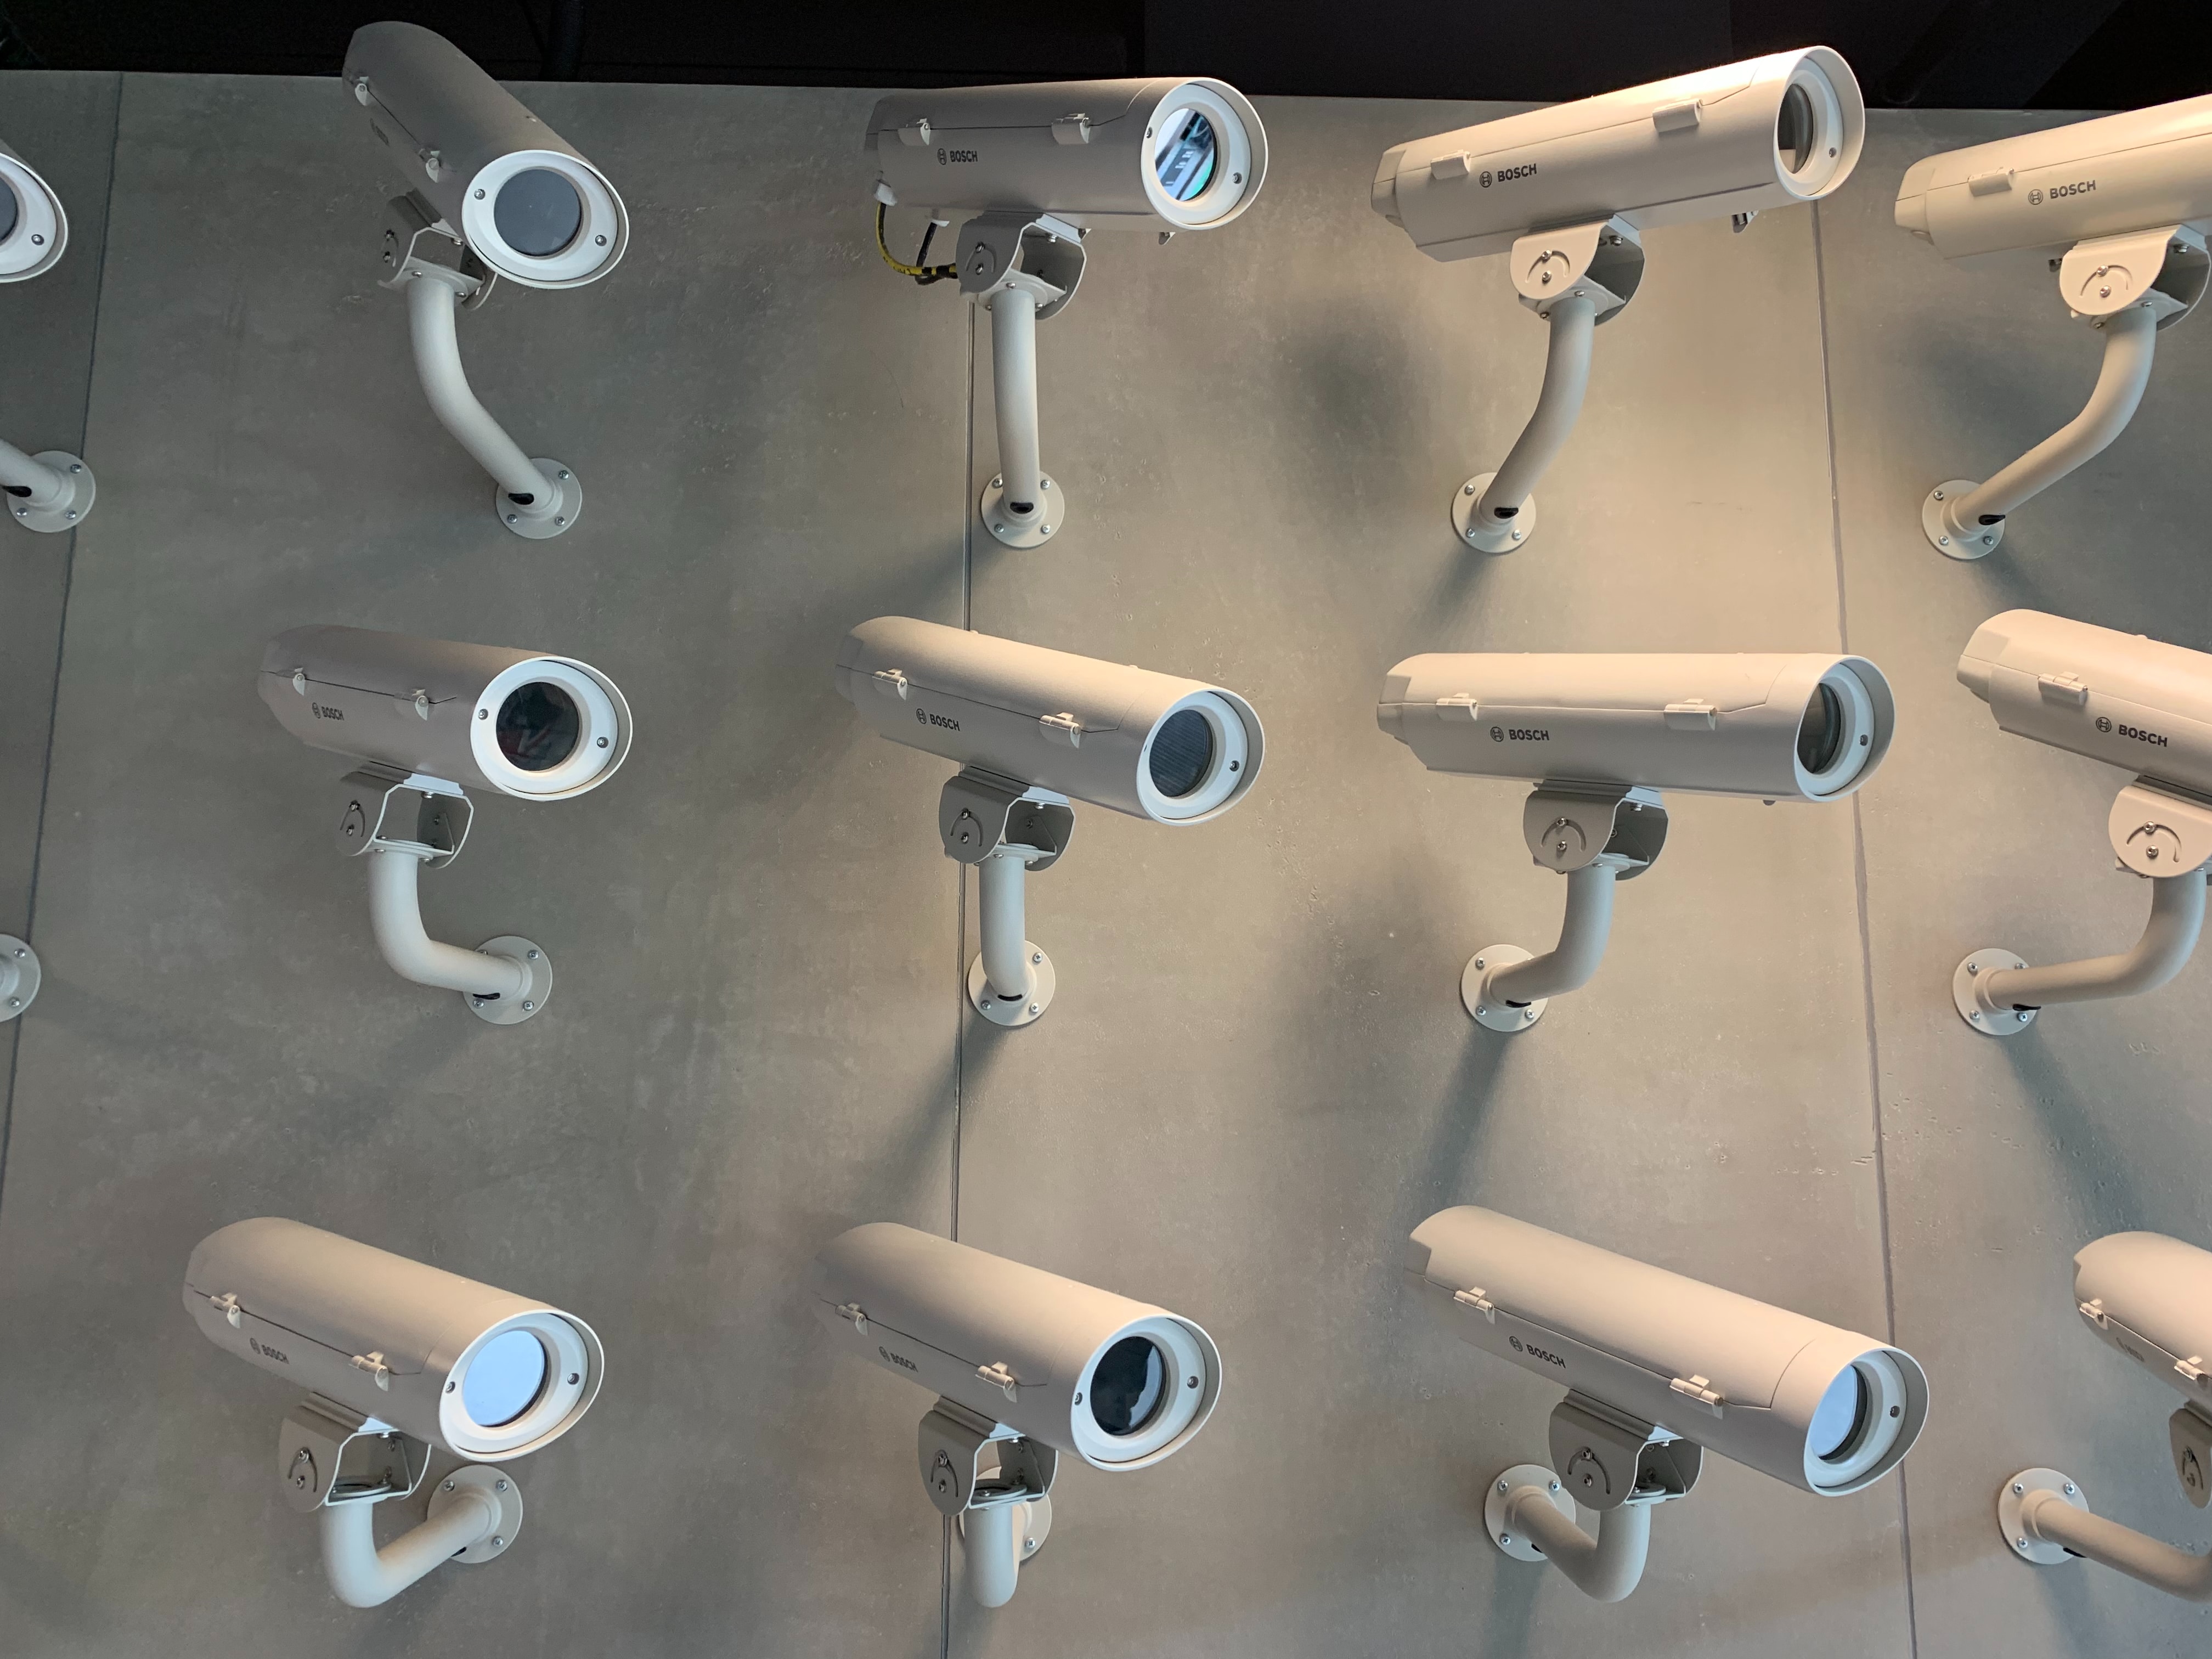 House bill makes CCTV cameras a must for these businesses